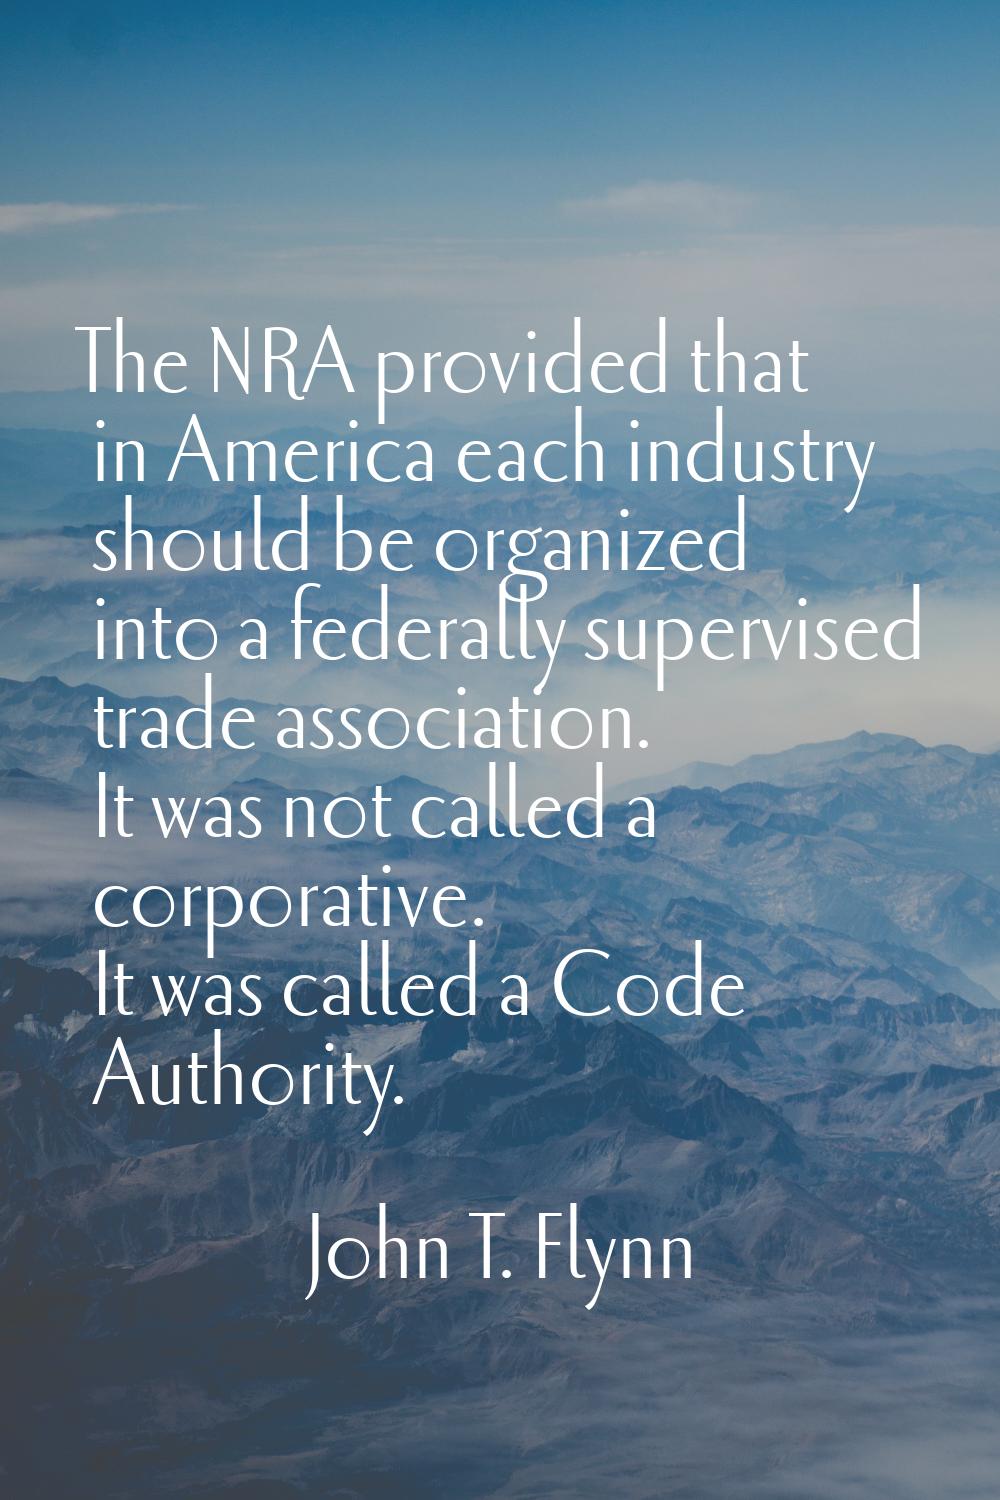 The NRA provided that in America each industry should be organized into a federally supervised trad